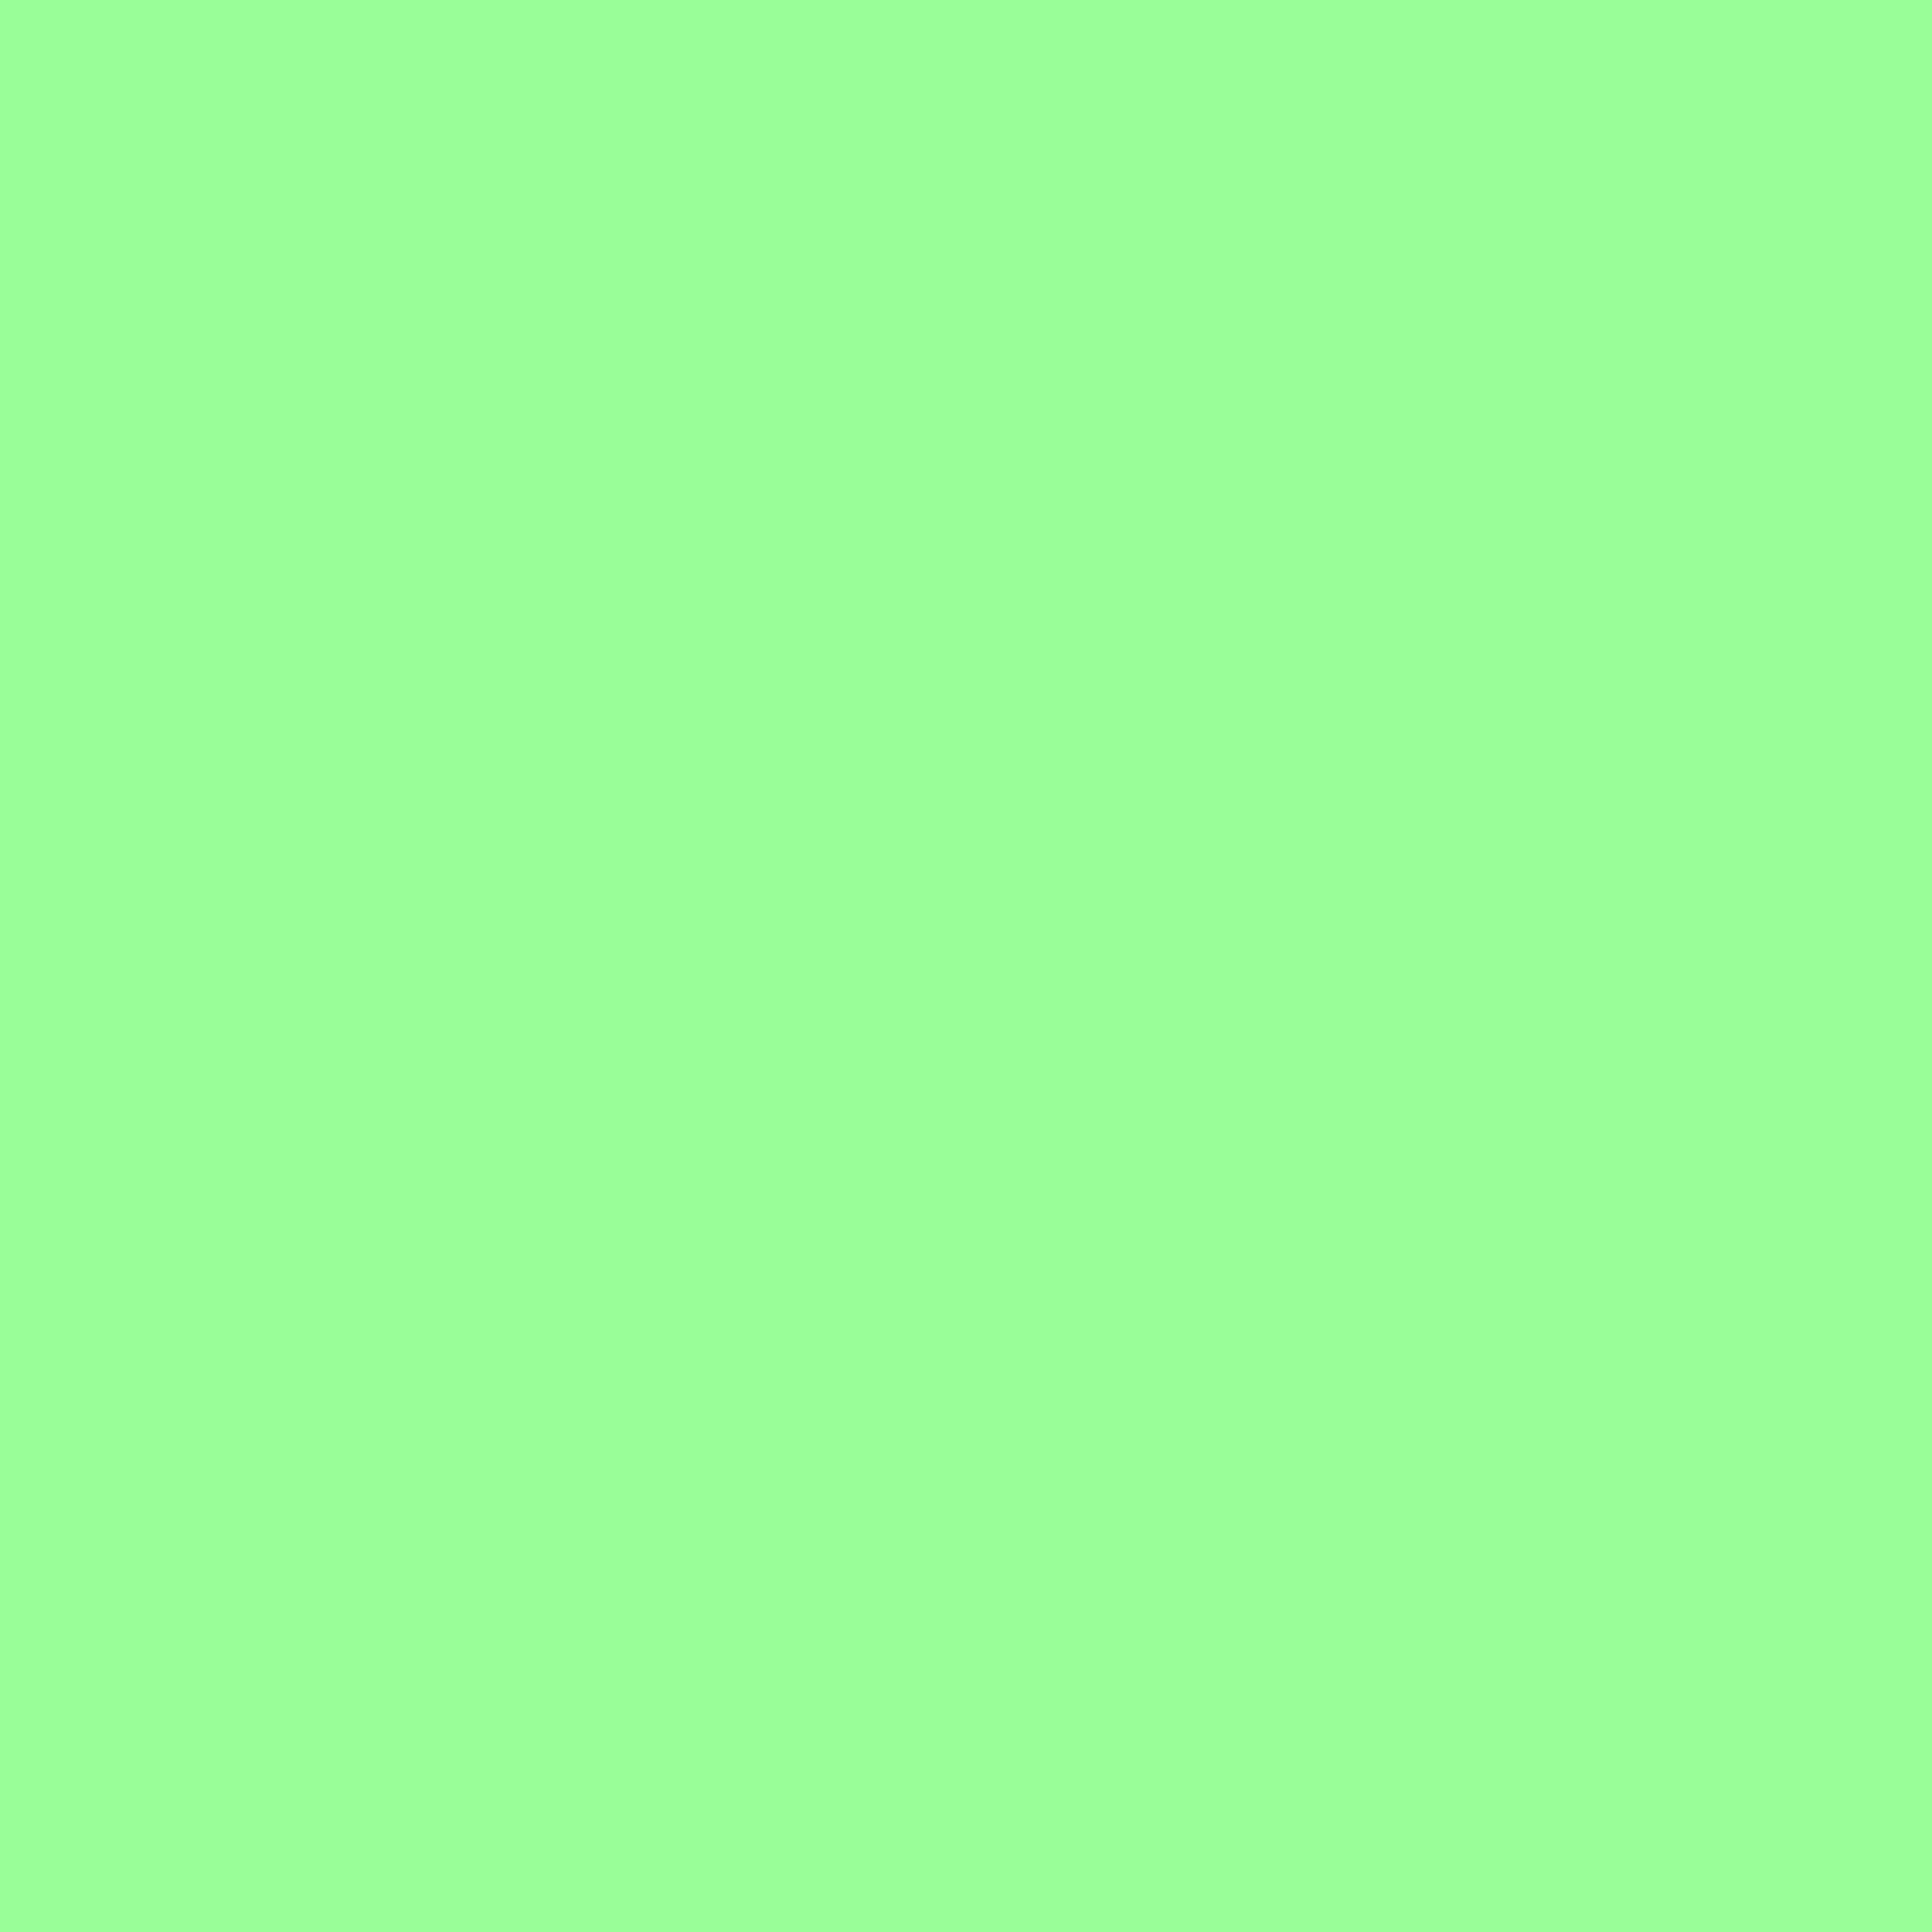 2732x2732 Mint Green Solid Color Background